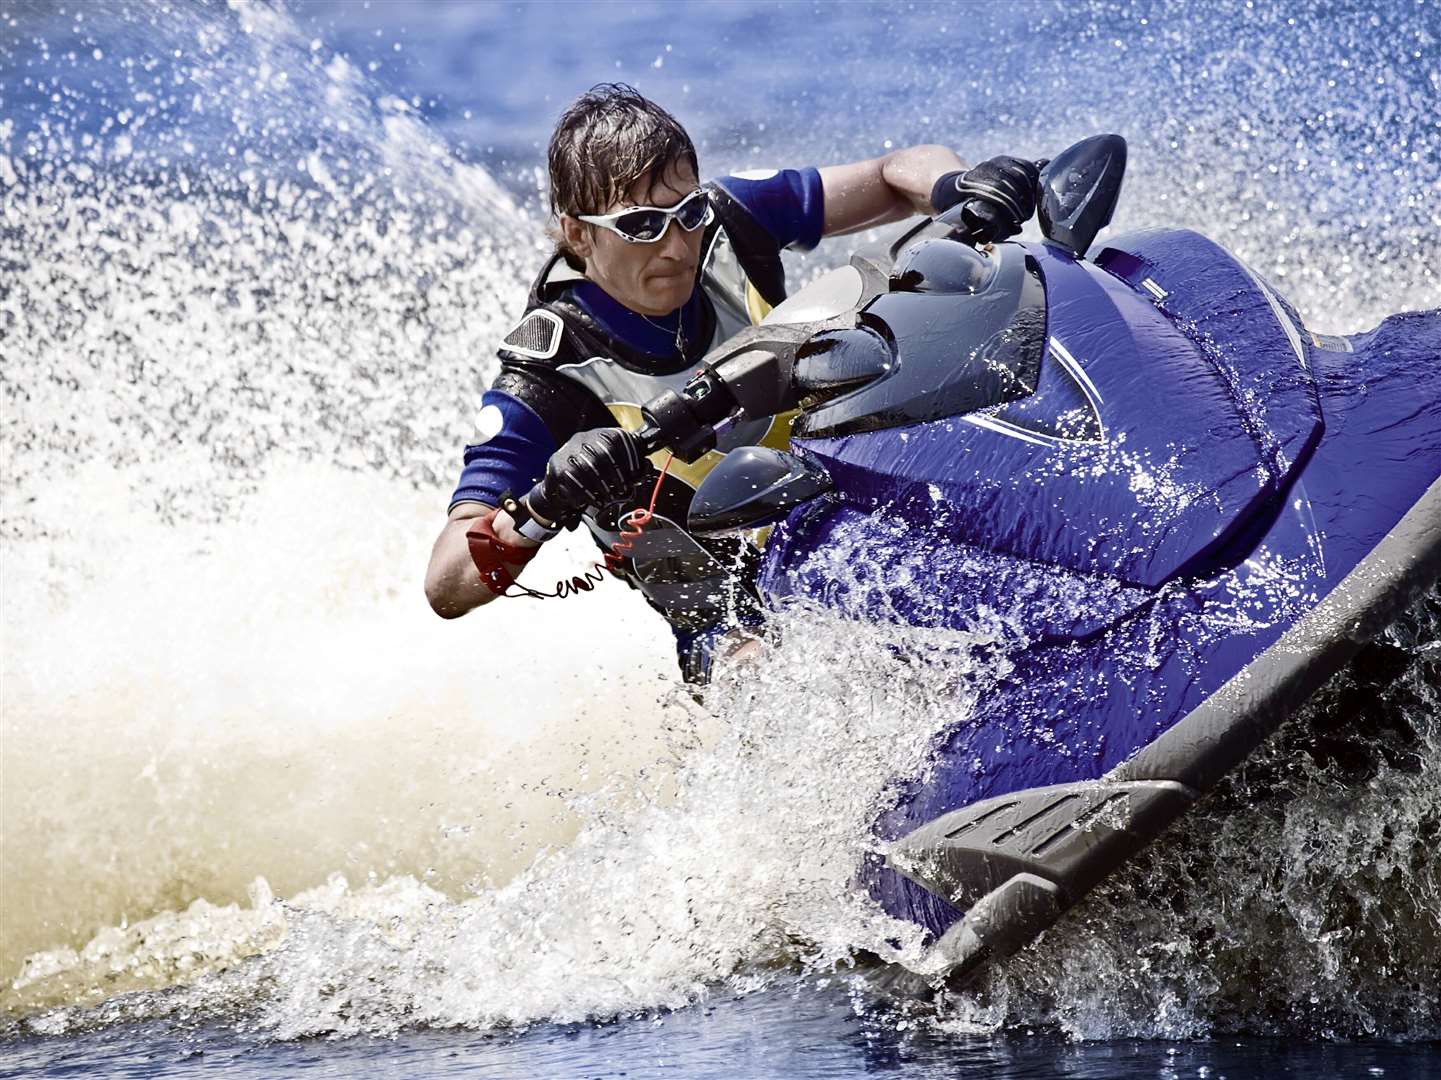 Have you tried jet skiing?